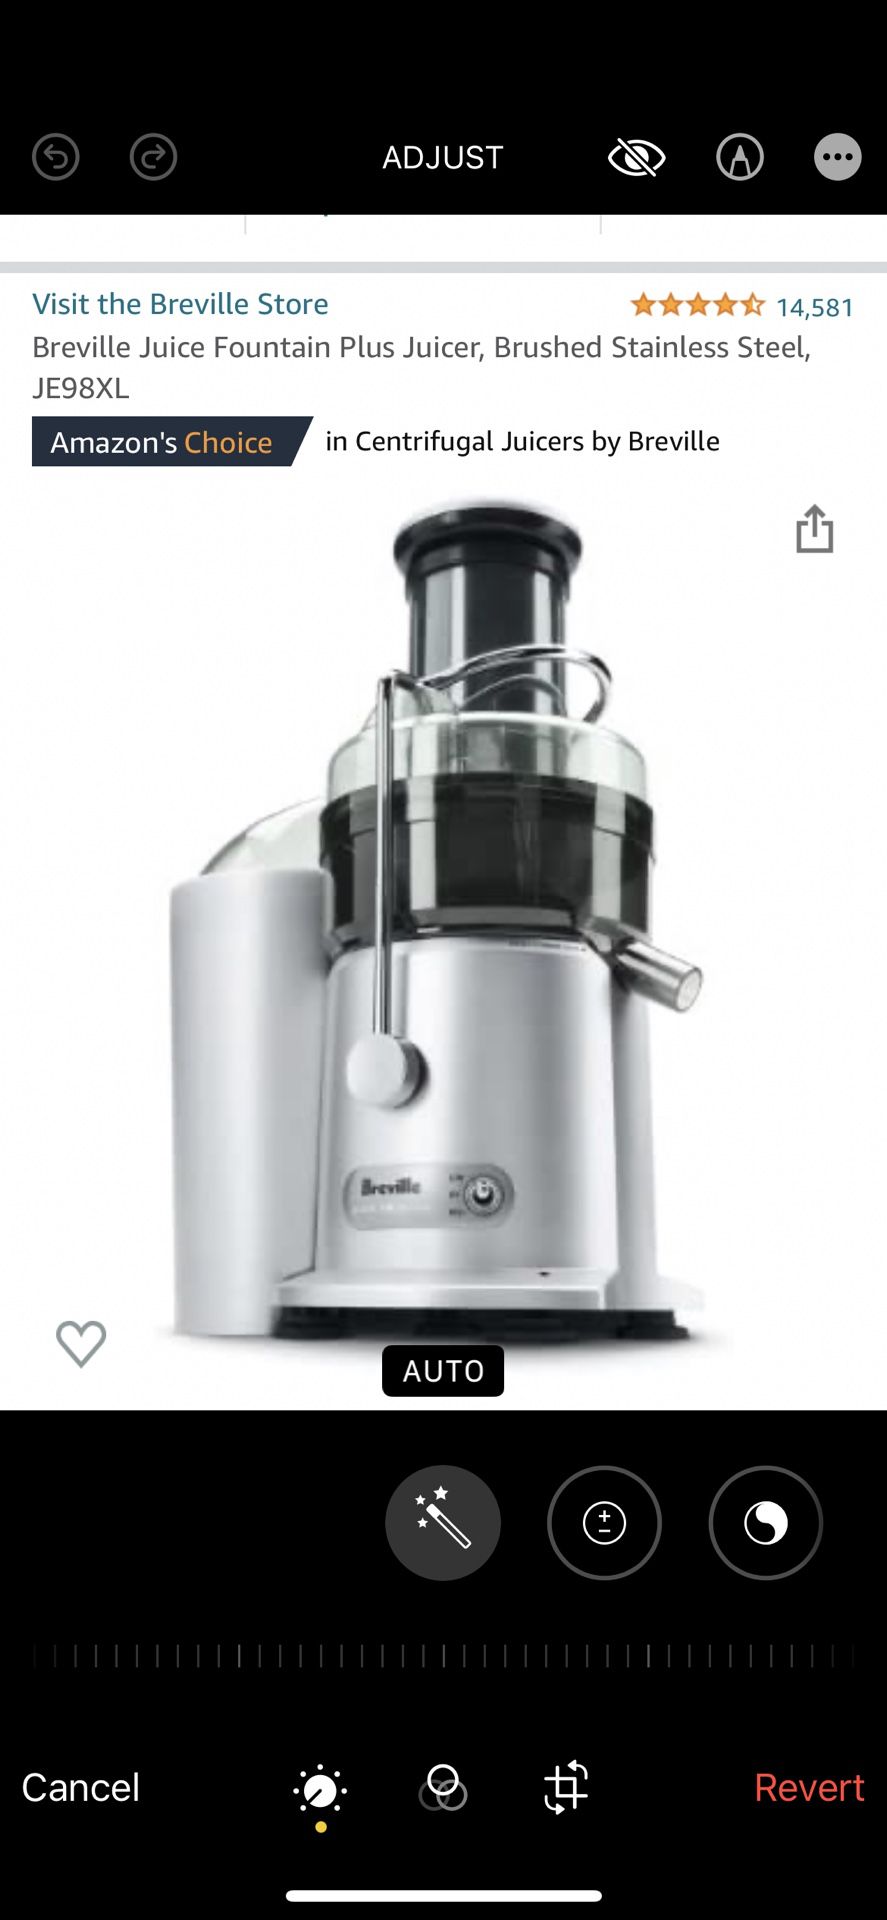 Breville Juice Fountain Plus Juicer, Brushed Stainless Steel, JE98XL 